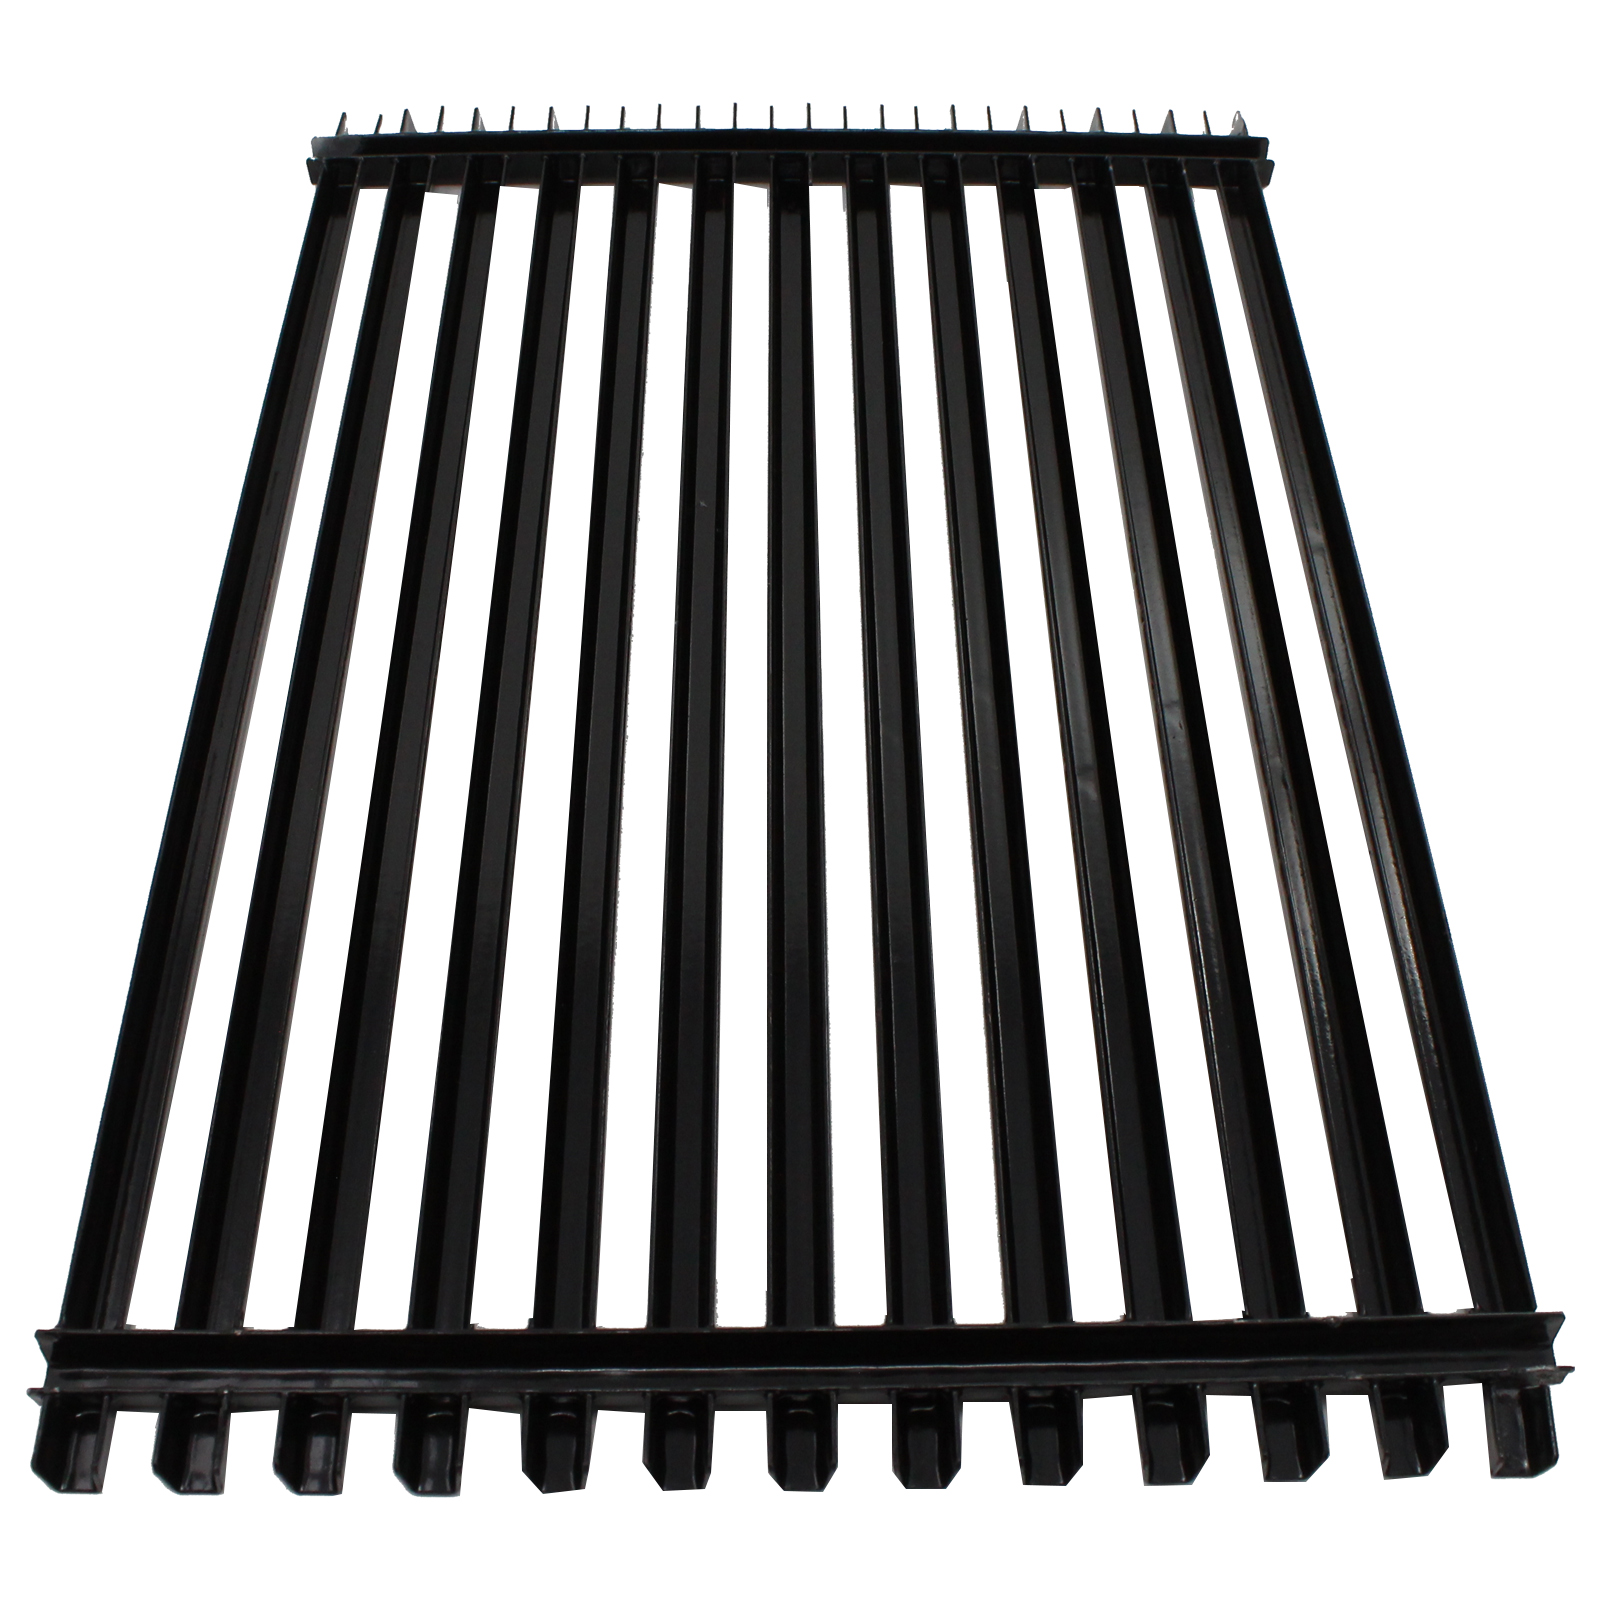 BBQ Grill Cooking Grates Replacement Parts for Weber Spirit E 310, Weber Genesis Silver B, Weber Genesis 1000, Weber Genesis Silver C - Compatible Barbeque Porcelain Coated Steel Grid 17 3/4" - image 4 of 4